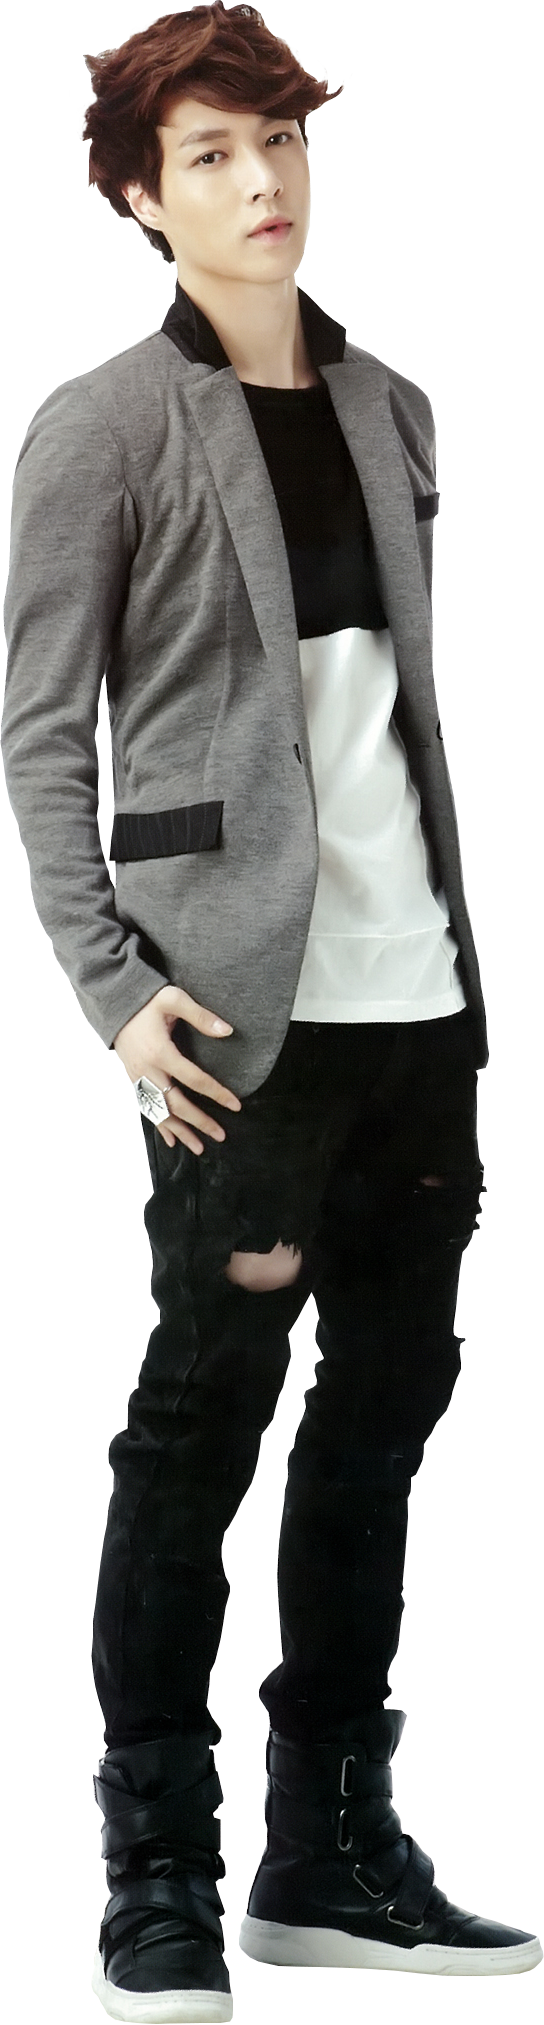 exo_m___lay__png__by_deerhansic-d5yjh82.